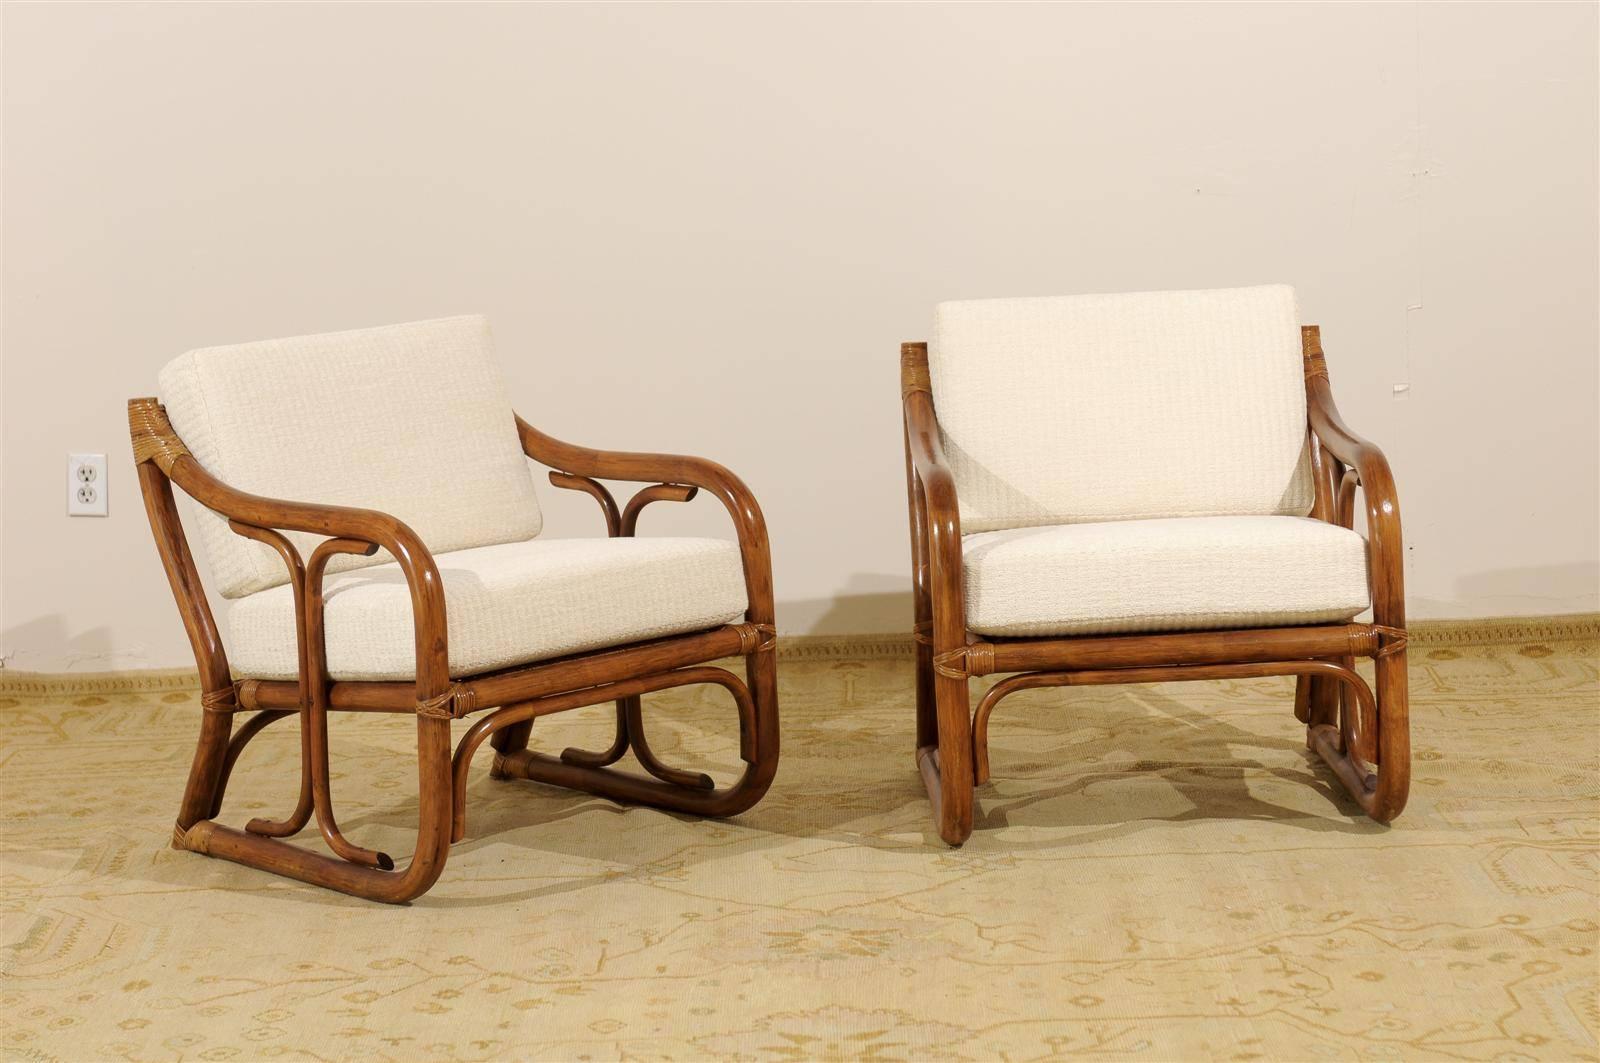 An exceptional pair of vintage loungers, circa 1970. Decorative, stout Modern rattan frame with a beautiful seat and back detail in raffia. A comfortable and compact design. Dramatic pieces that do not demand a great deal of floor area. Excellent